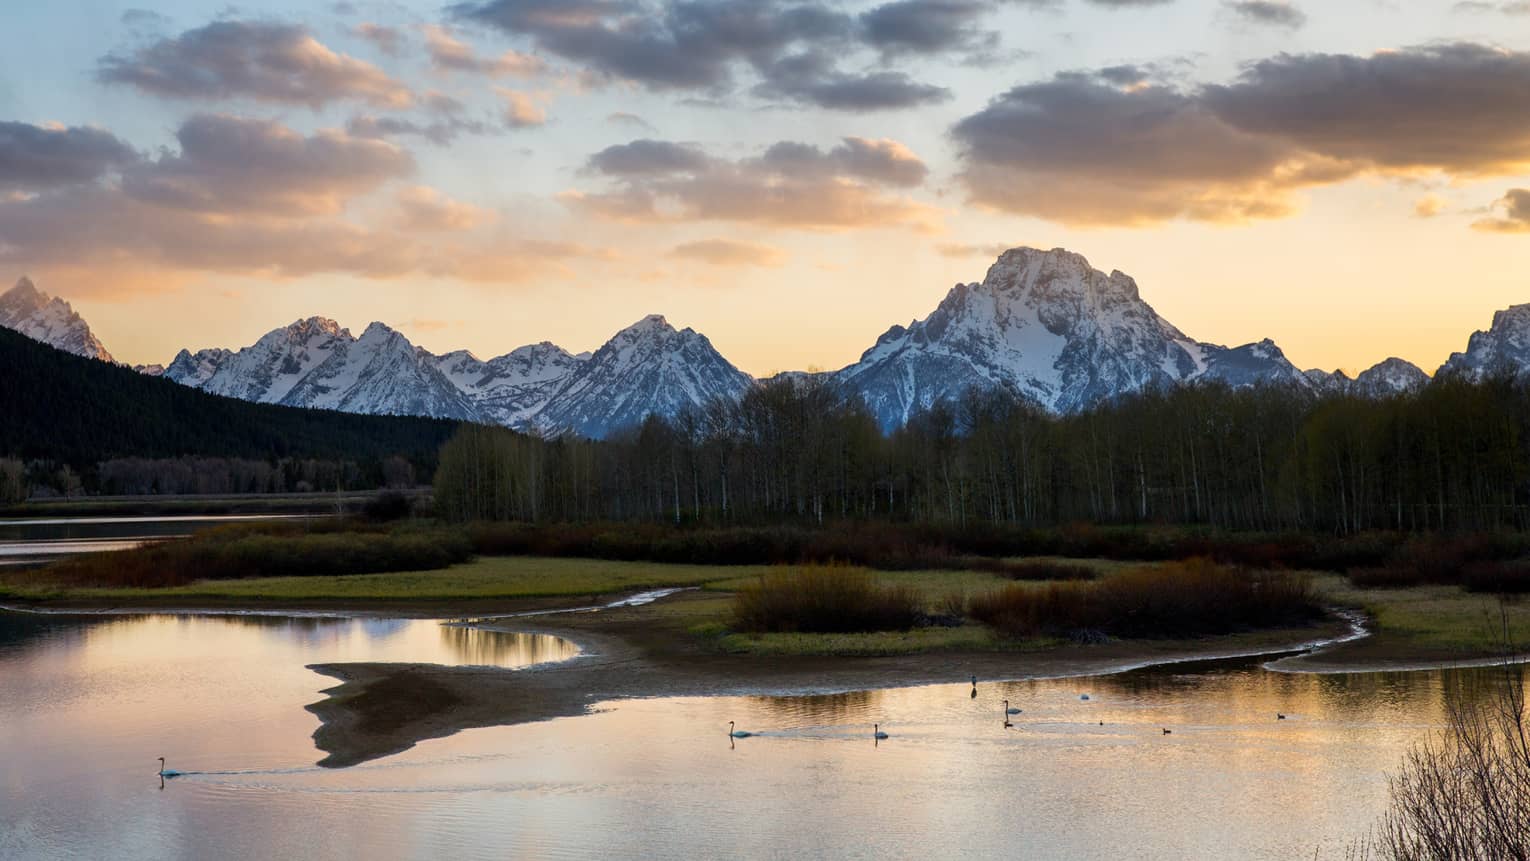 Snow-capped mountains over grass, pond with ducks at sunset